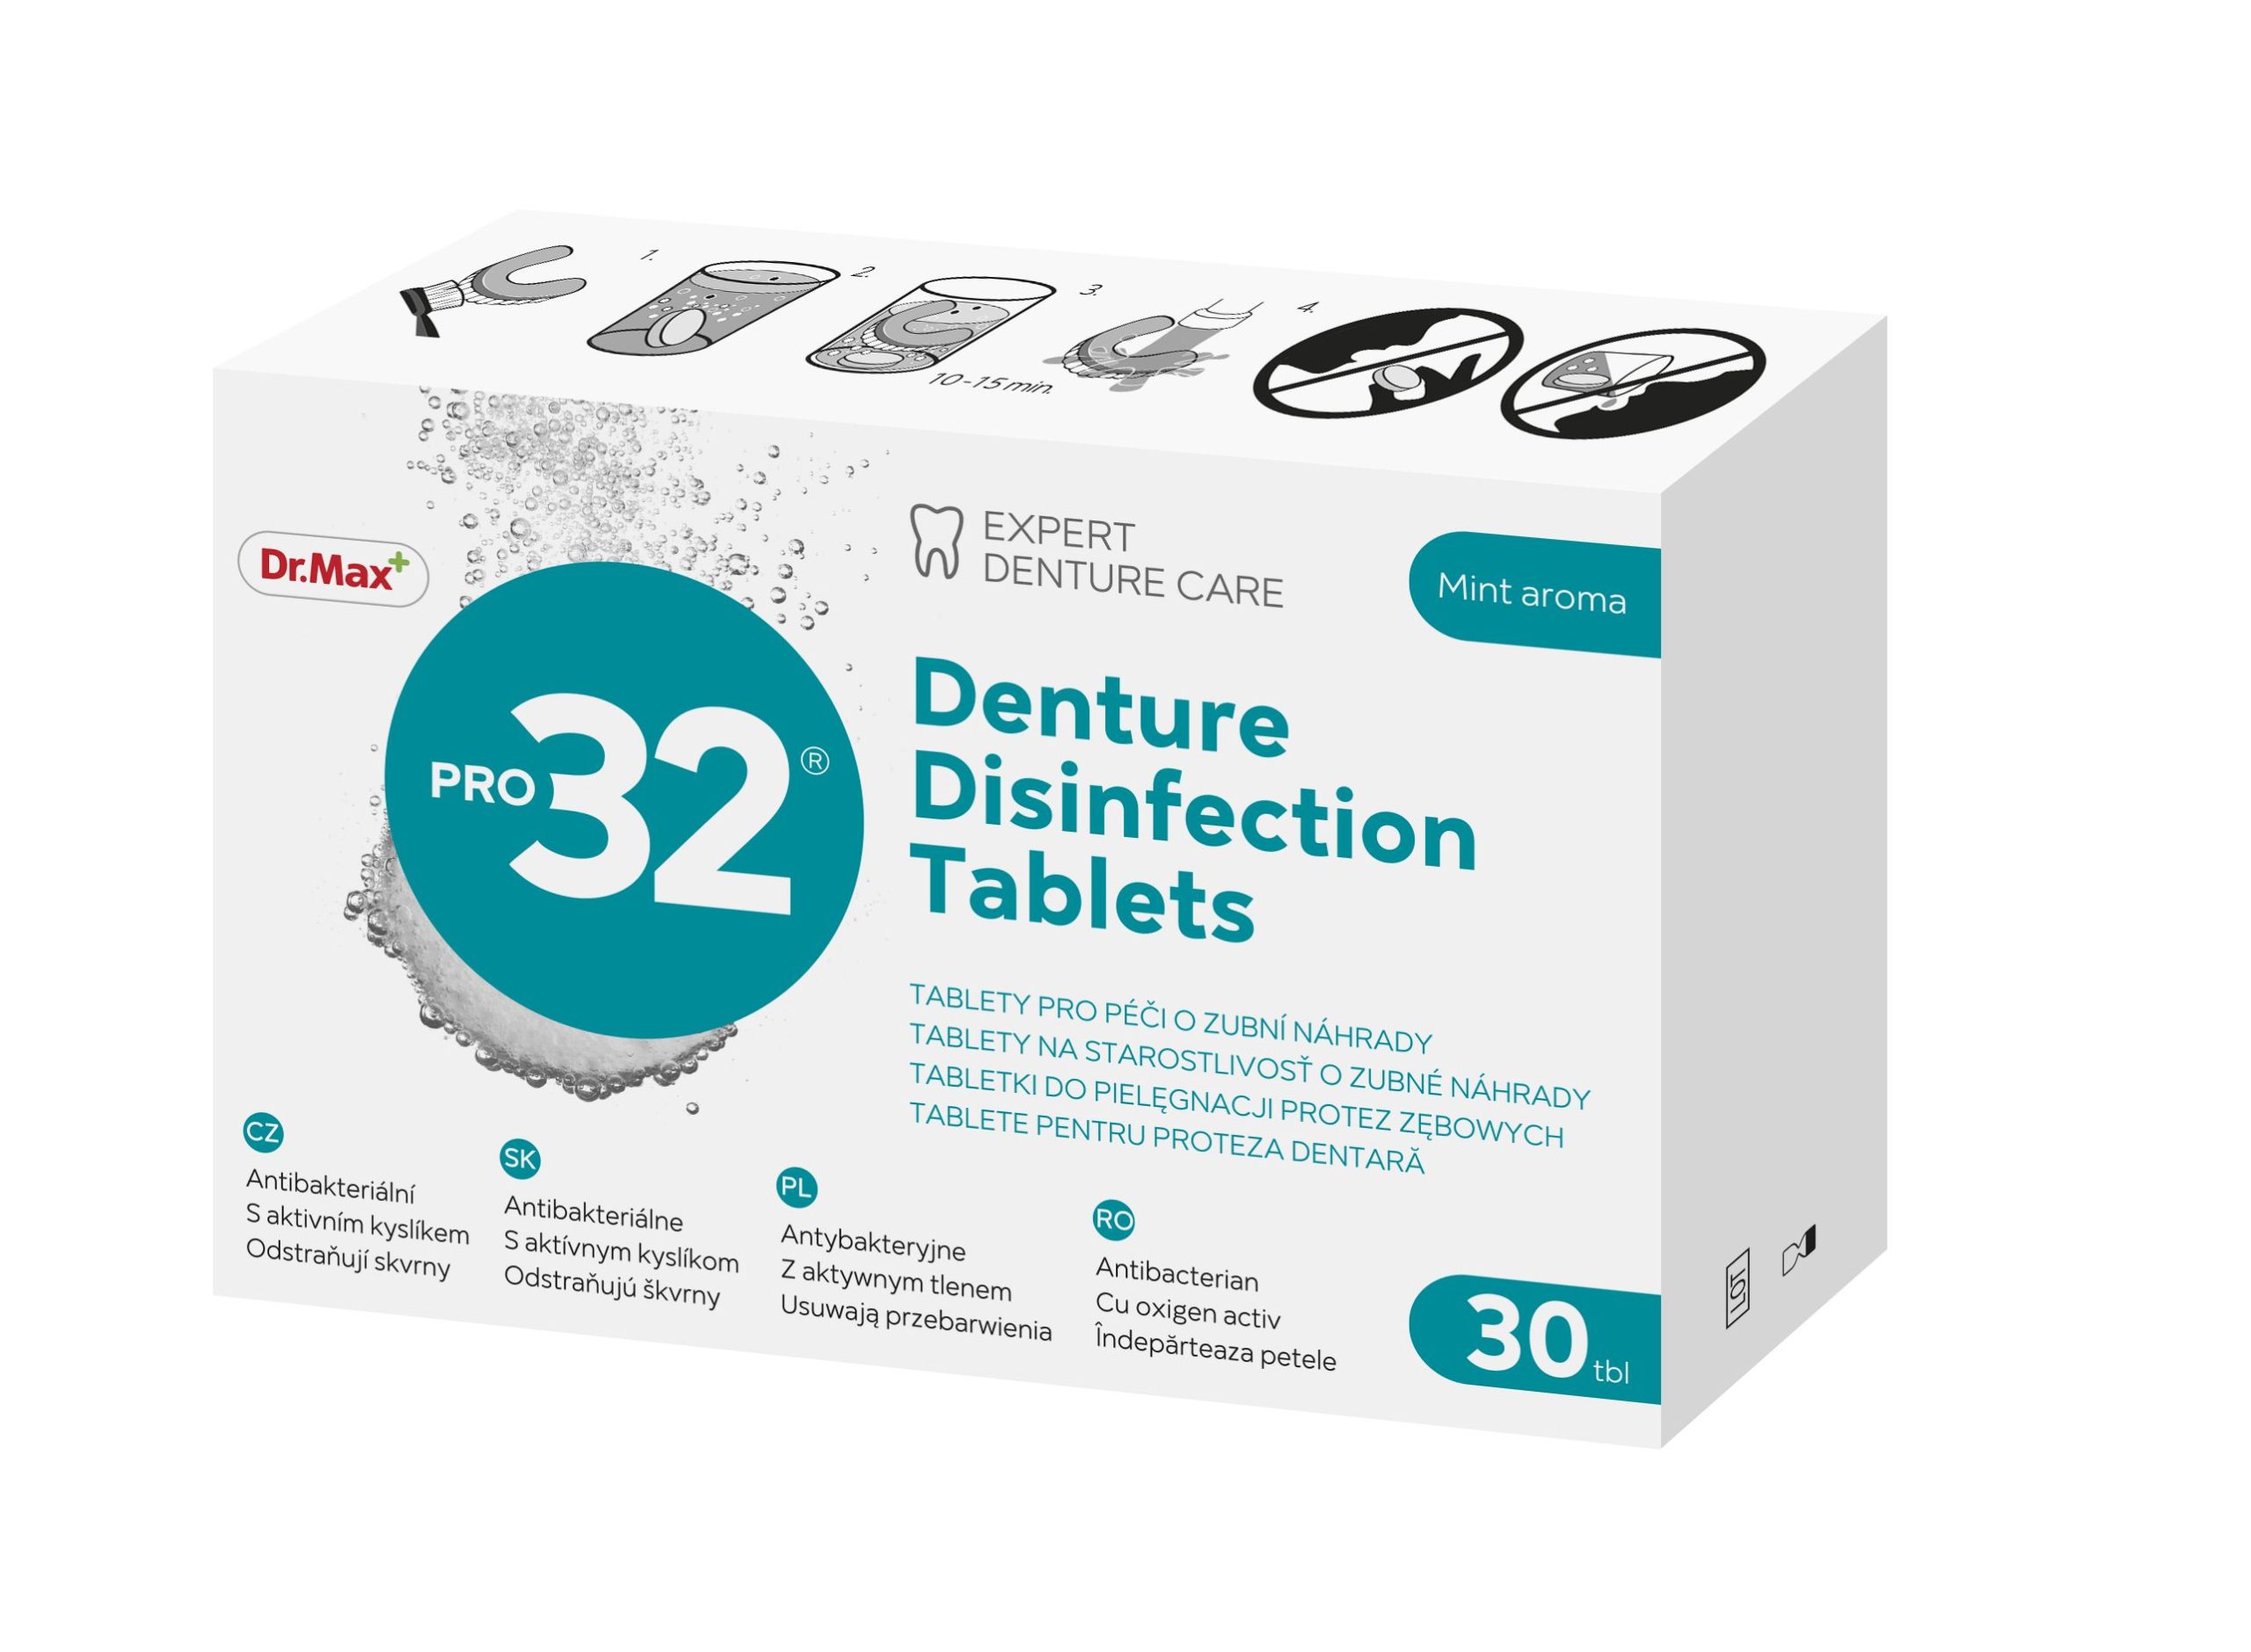 Dr.Max PRO32 Denture Disinfection Tablets 30 tablet Dr.Max